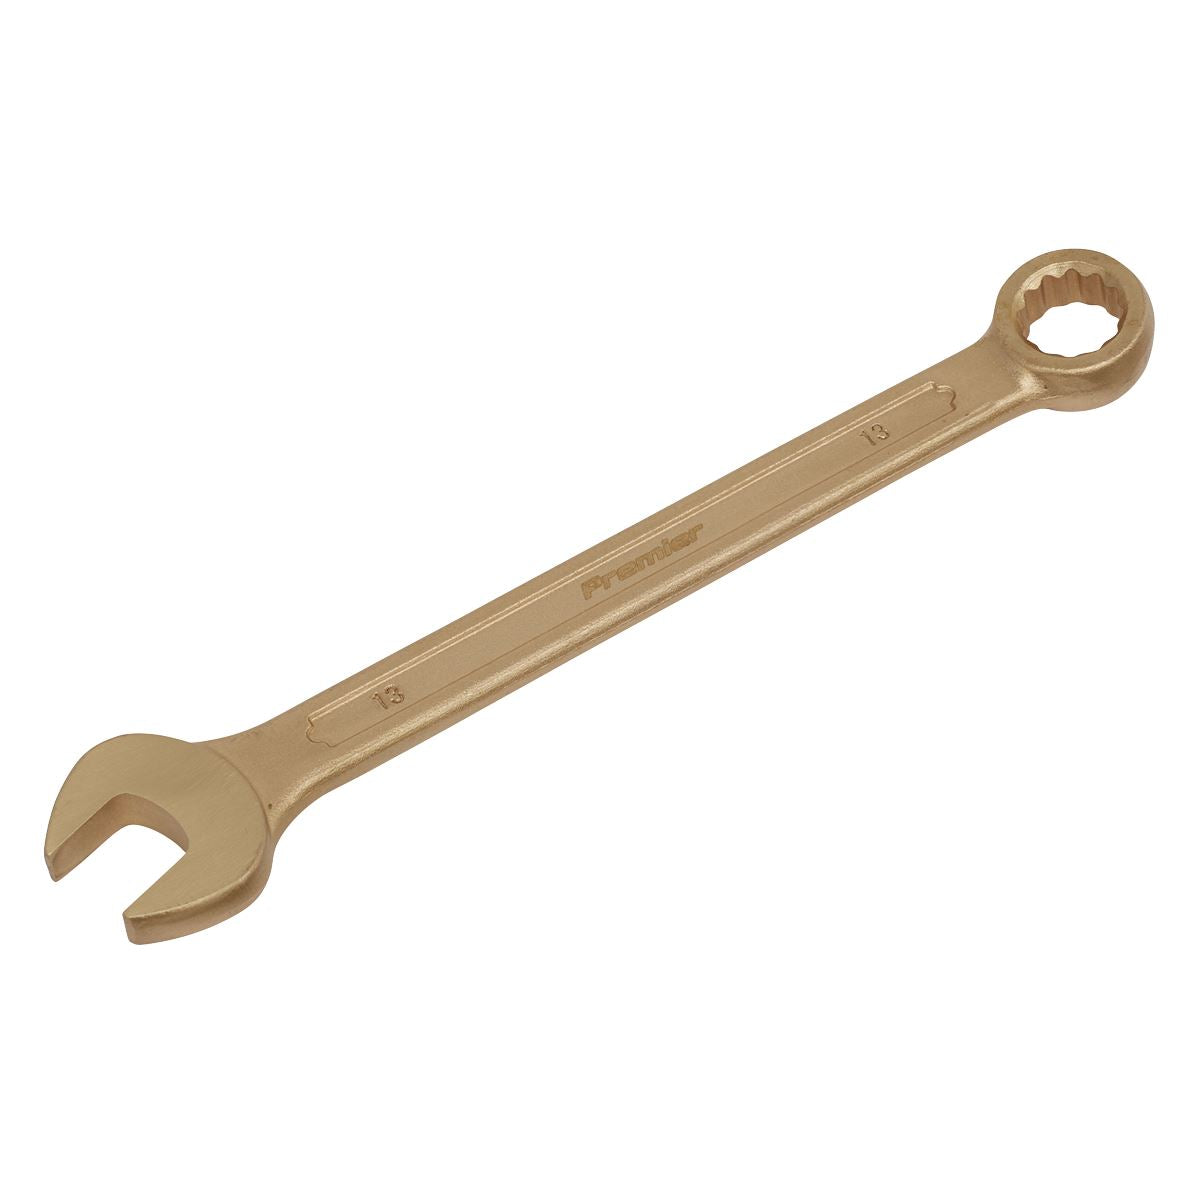 Sealey Premier Combination Spanner 13mm - Non-Sparking